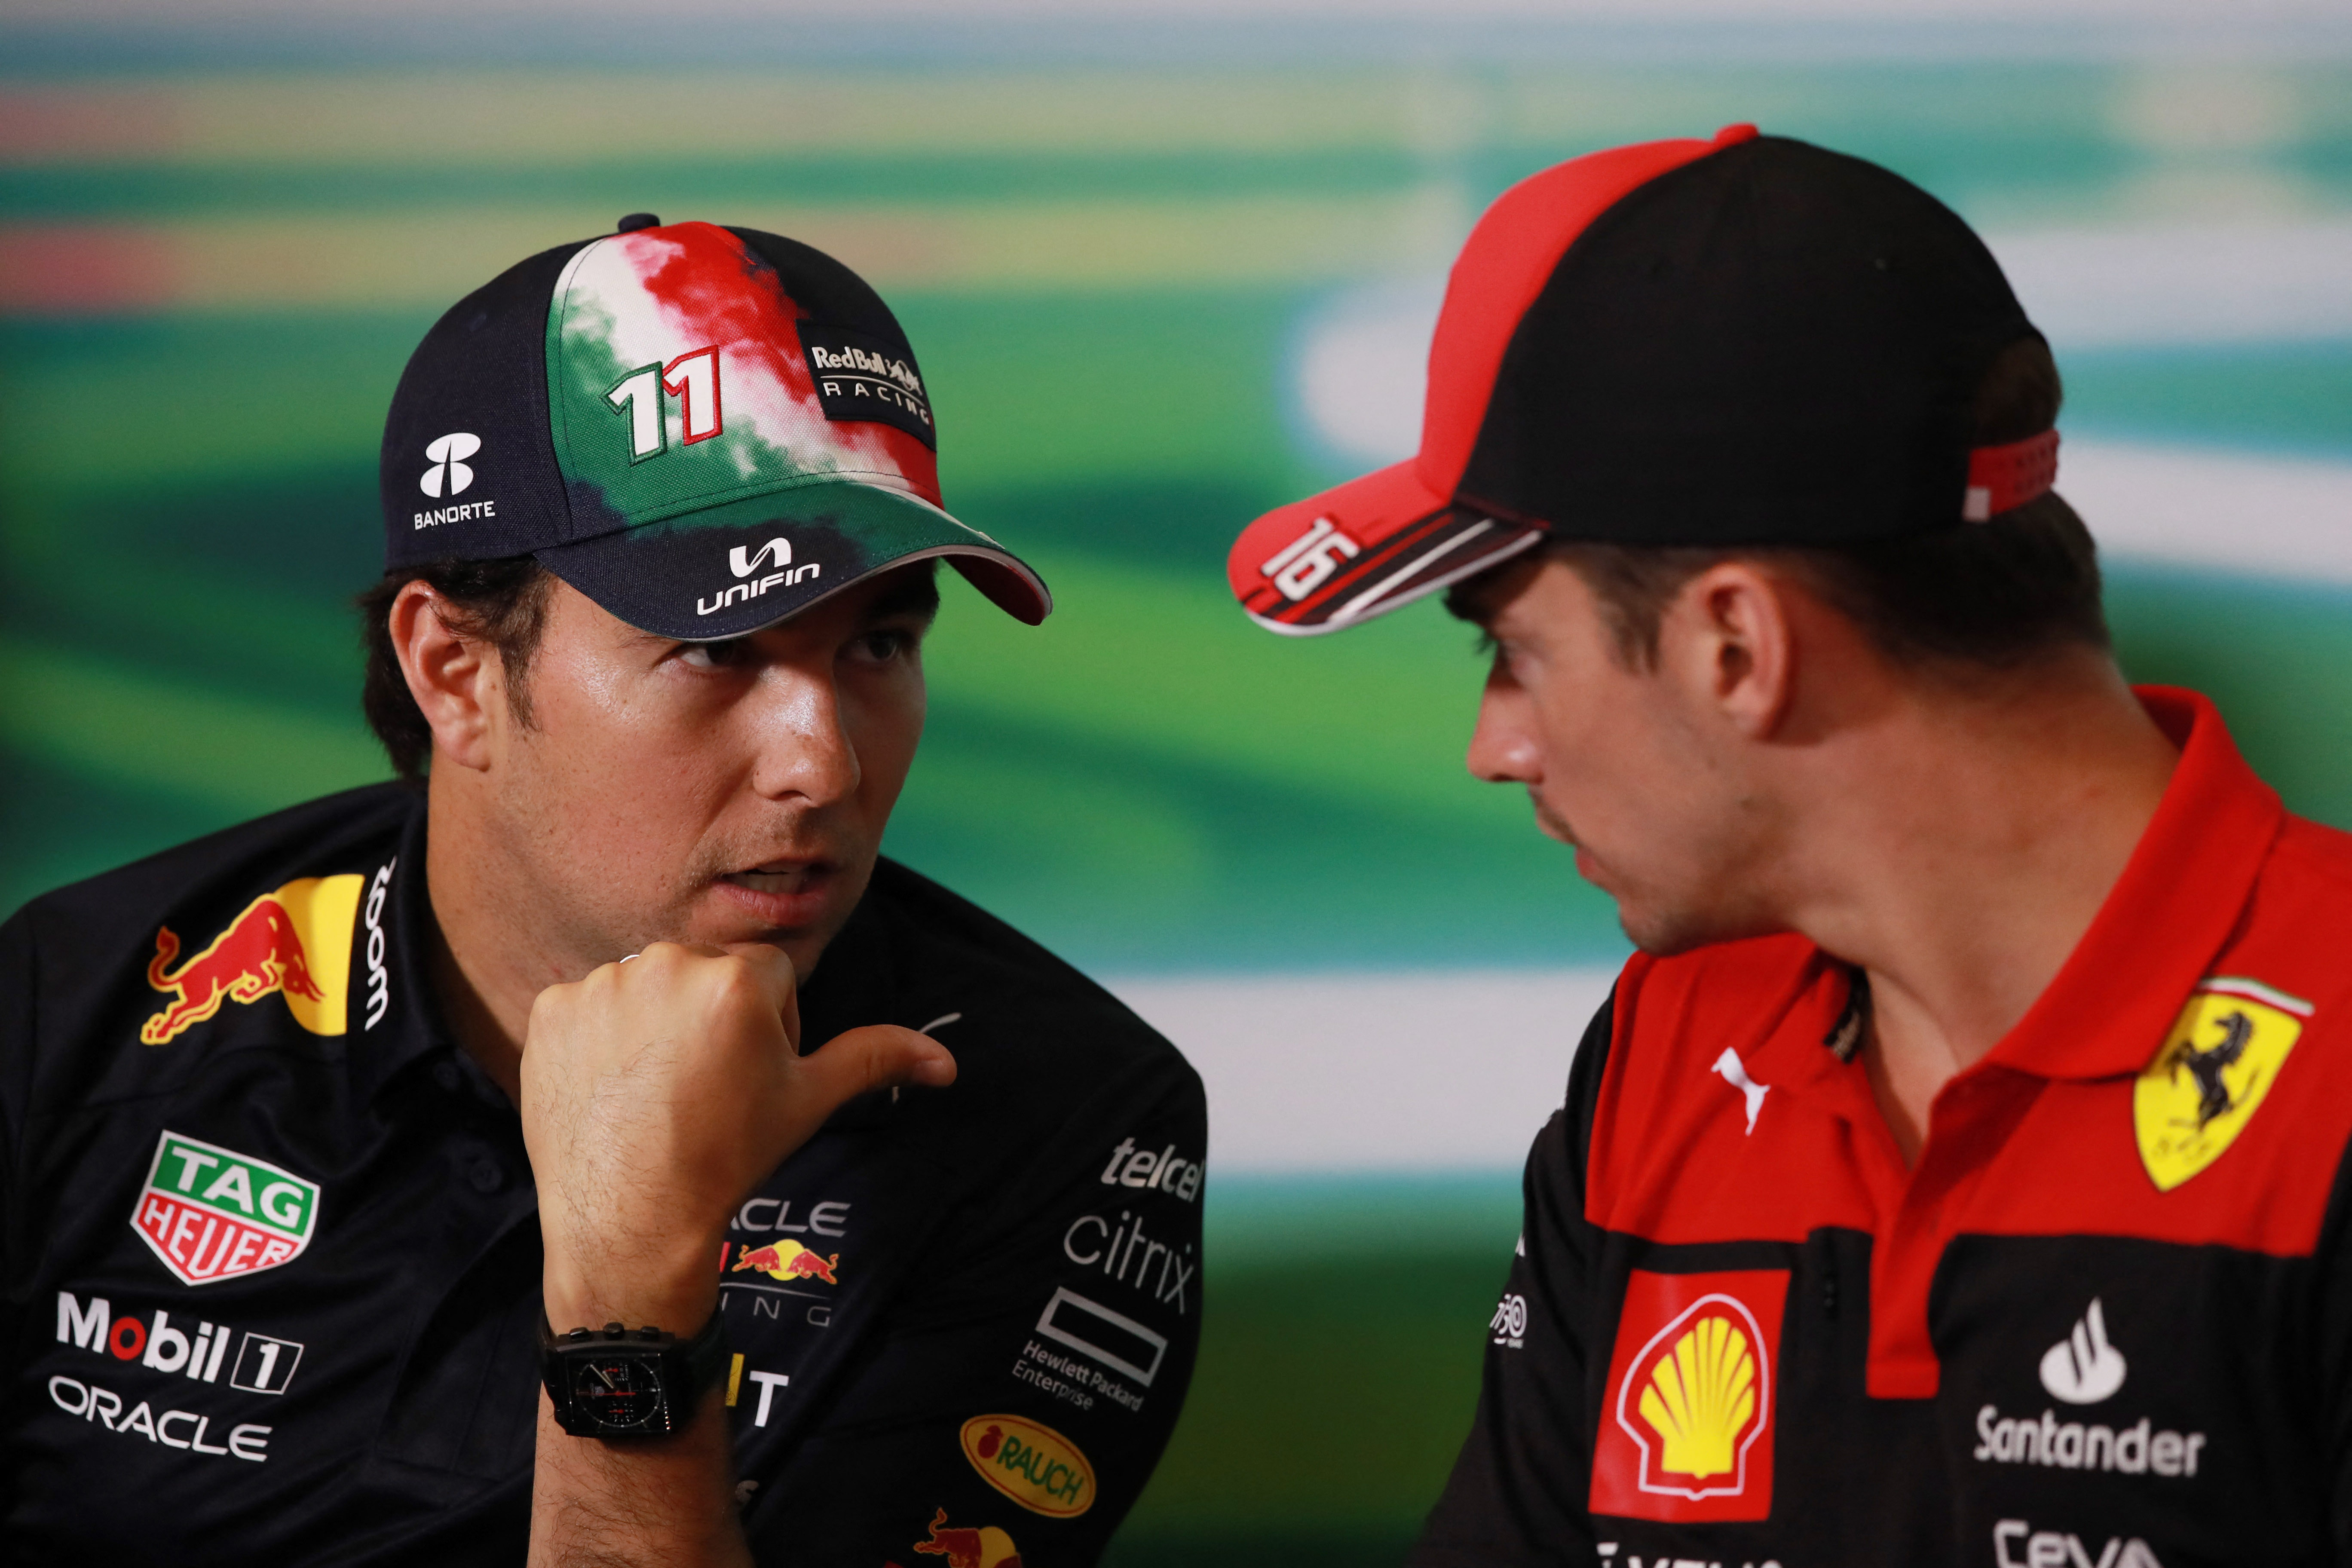 Checo Pérez and Charles Leclerc are competing for the driver's runner-up position.  (Photo: REUTERS/Henry Romero)